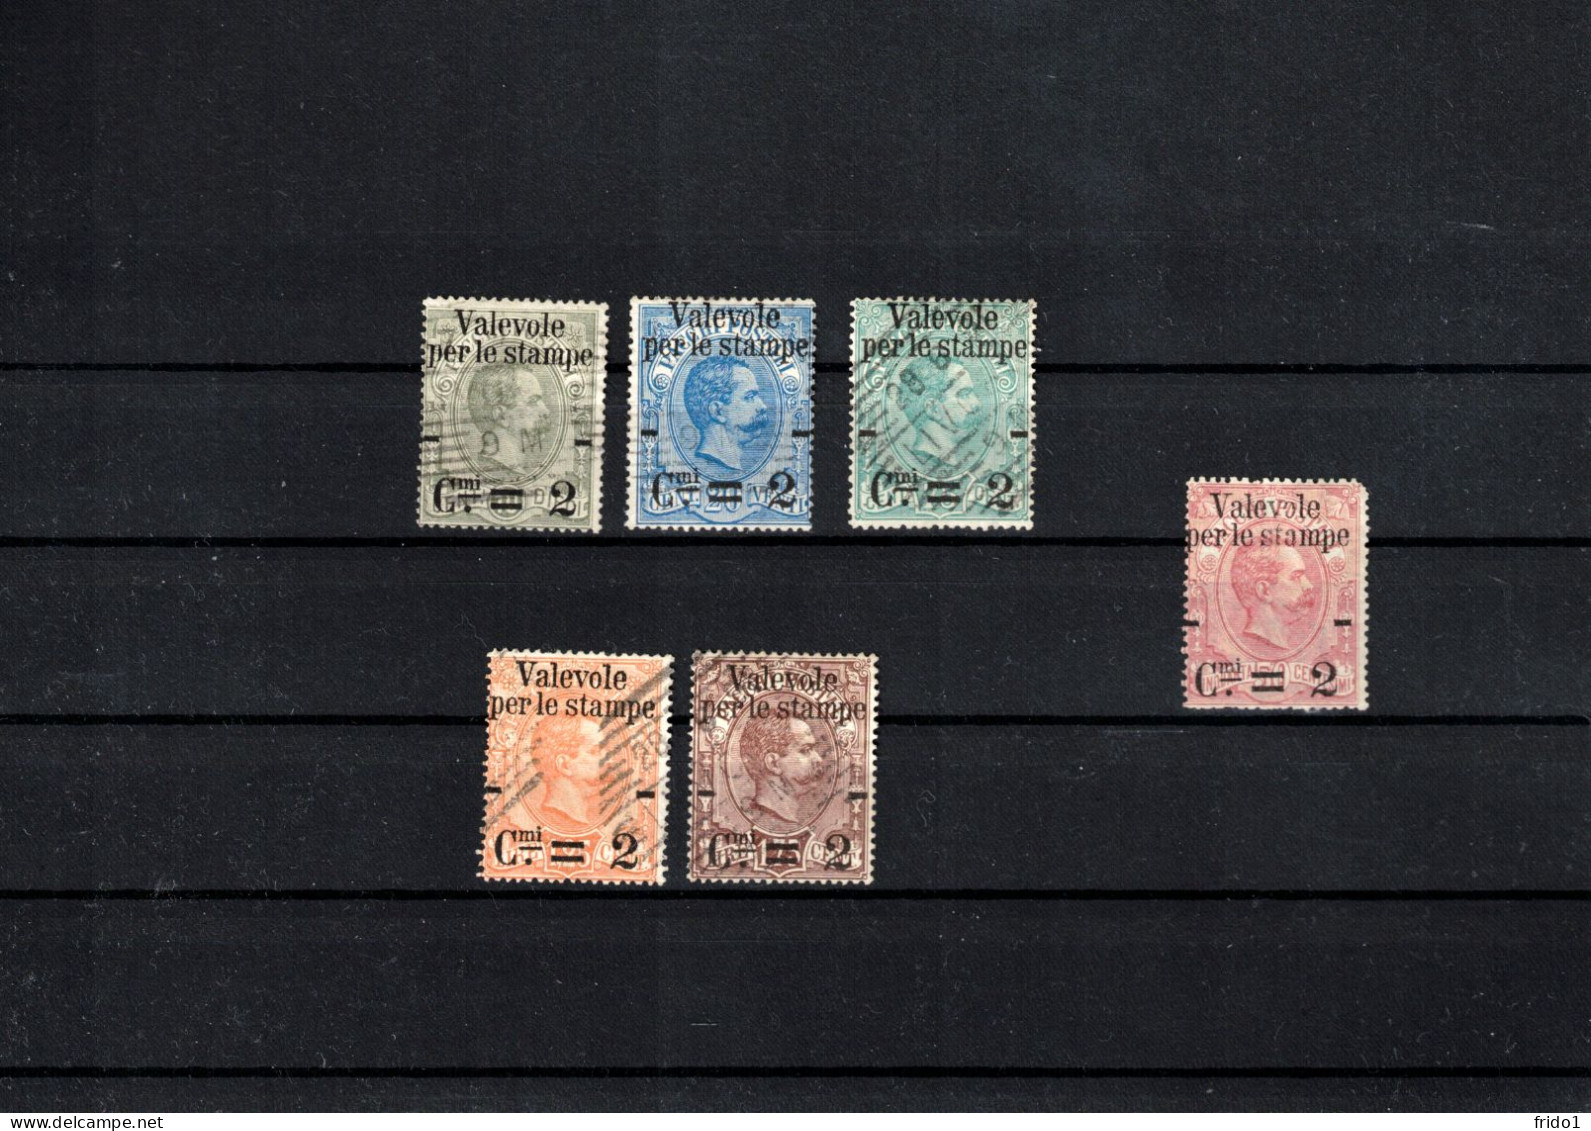 Italy / Italia 1890 Packet Stamps Overprinted For The Use As Press Stamps Fine Used - 50c Overprint Just As Sample - Oblitérés